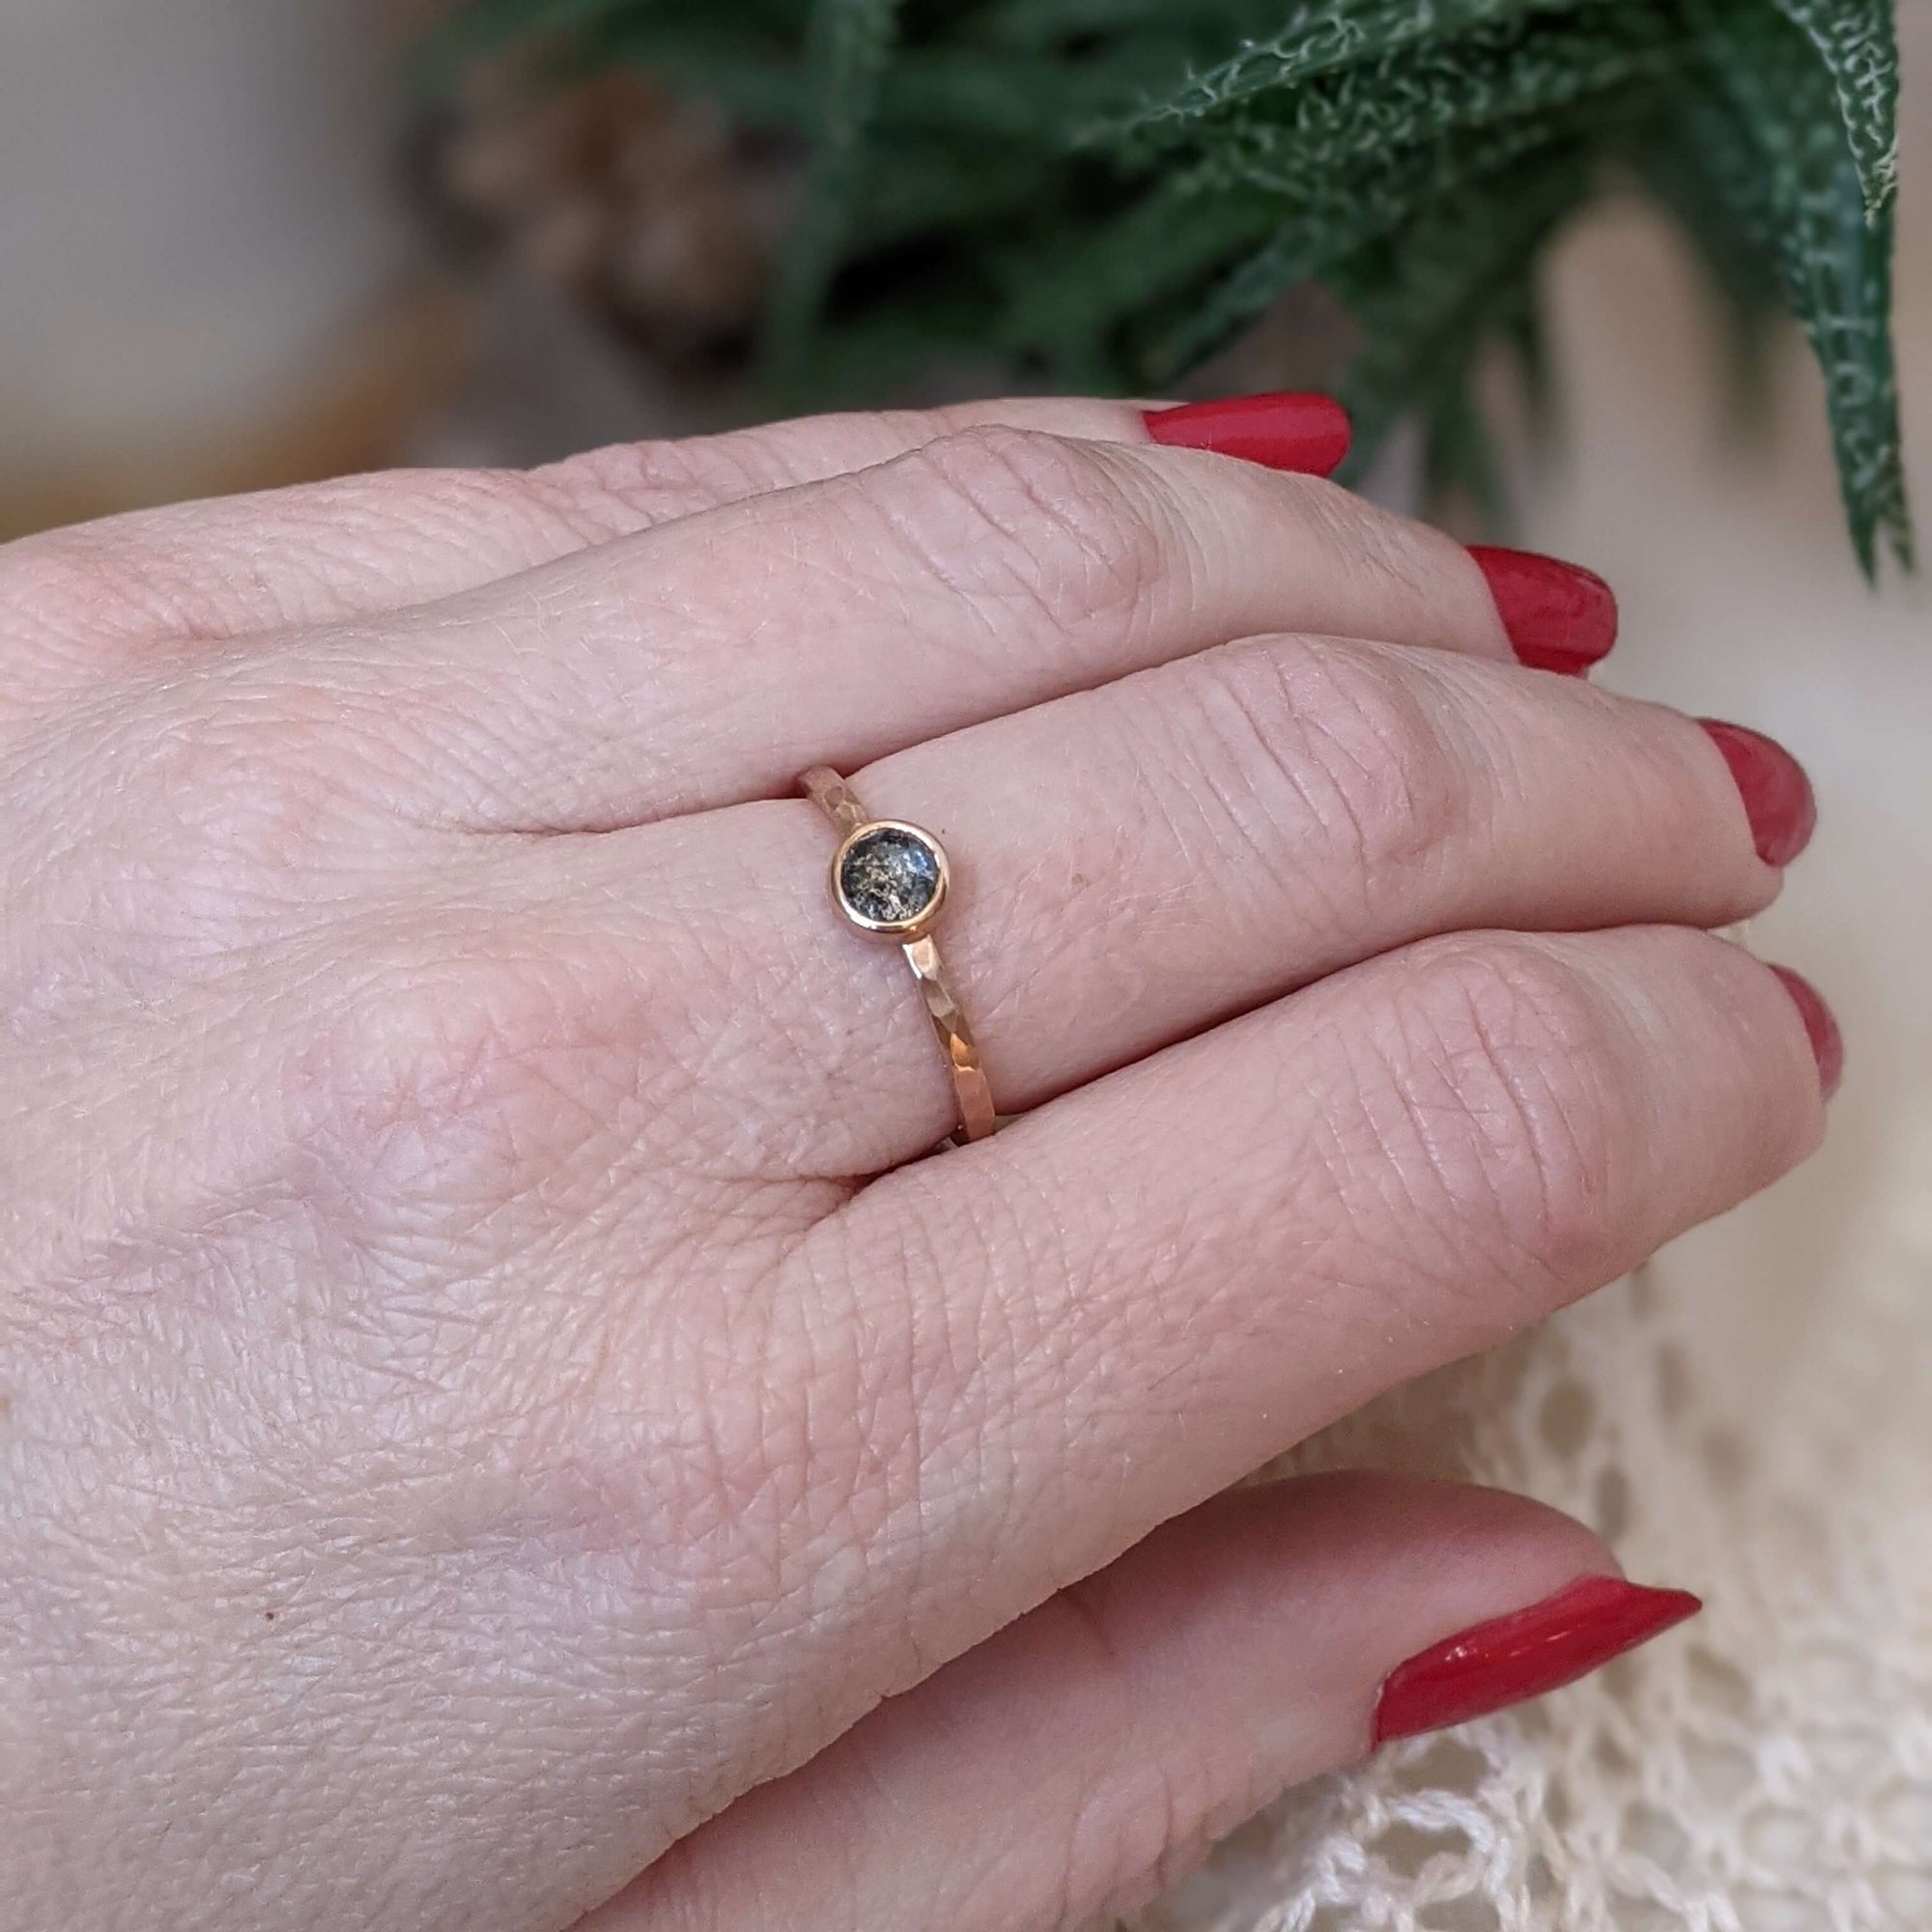 Rose gold and salt and pepper diamond engagement ring. Handmade by EC Design Jewelry in Minneapolis, MN.